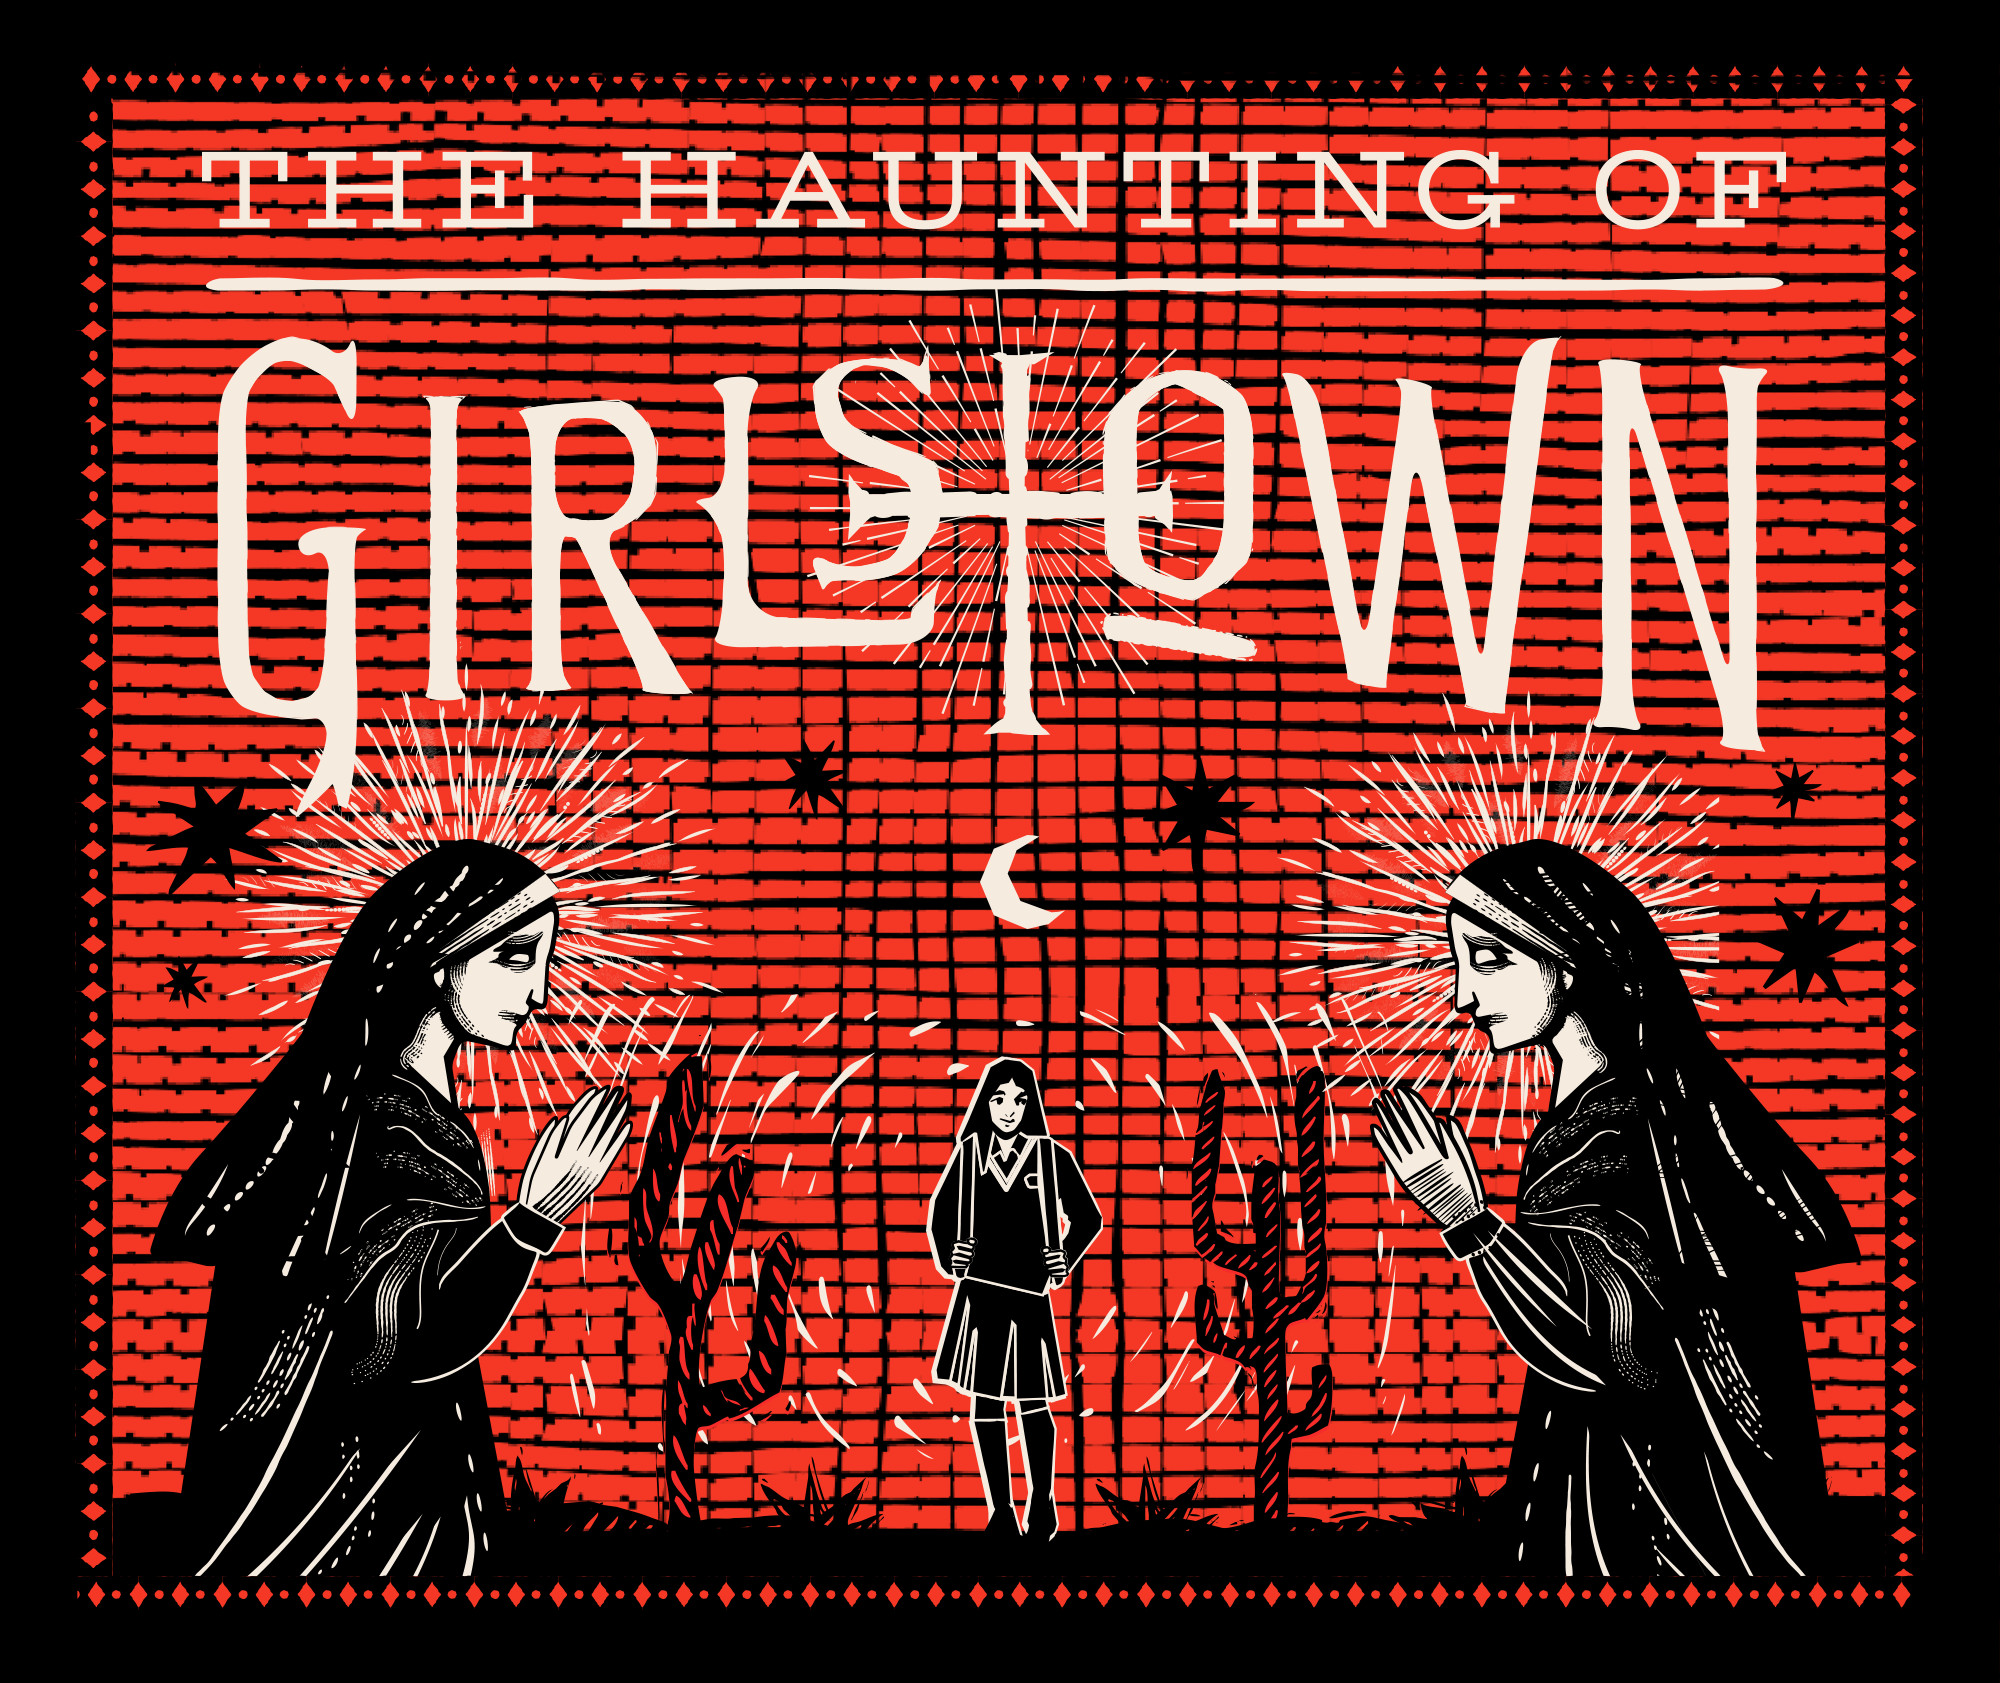 The Haunting of Girlstown. Illustration of nuns looking at a schoolgirl amid cactuses and stars.